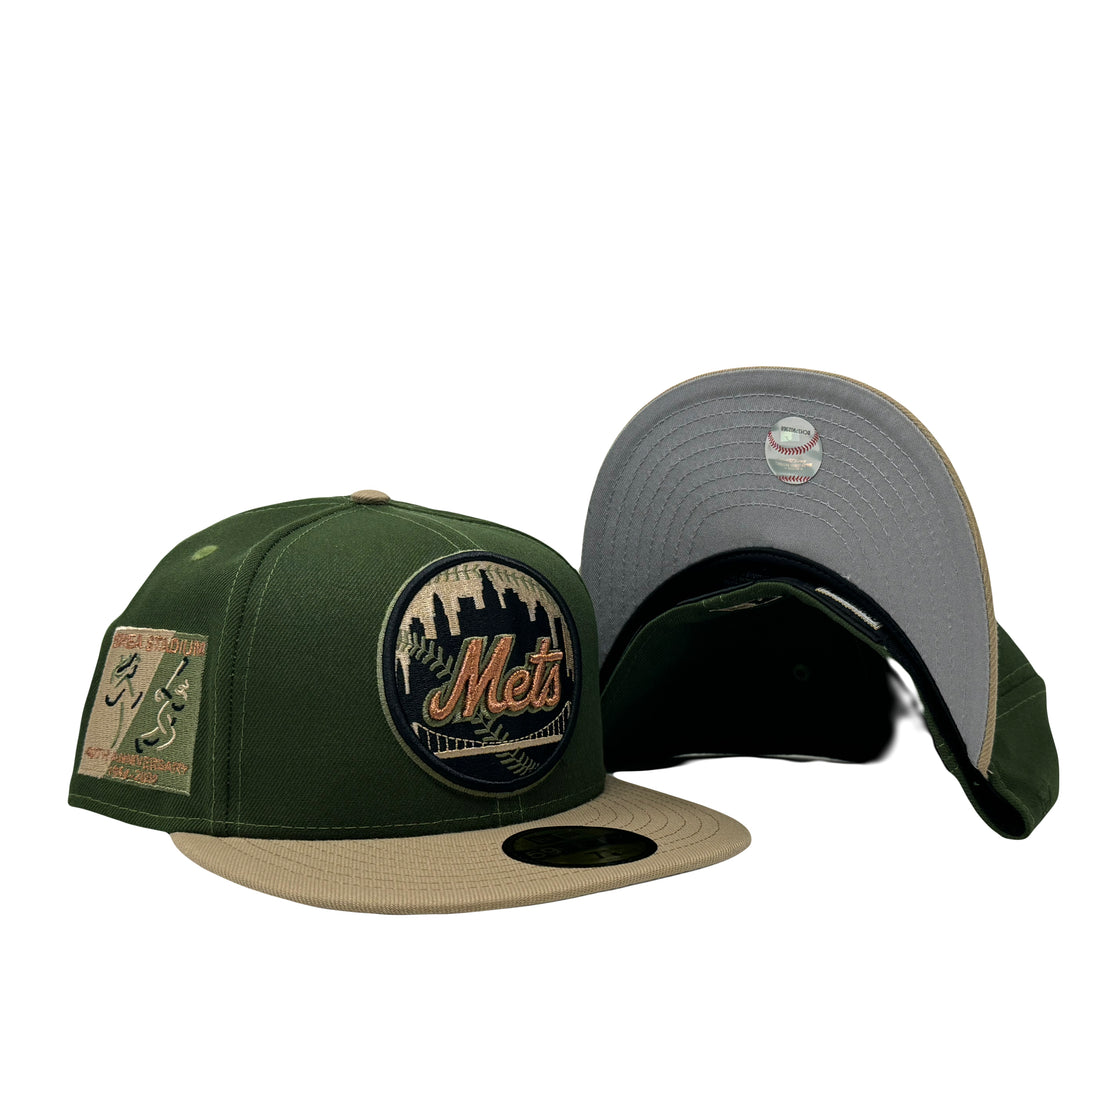 New York Mets Shea Stadium 40th Anniversary Olive Camel New Era Fitted Hat